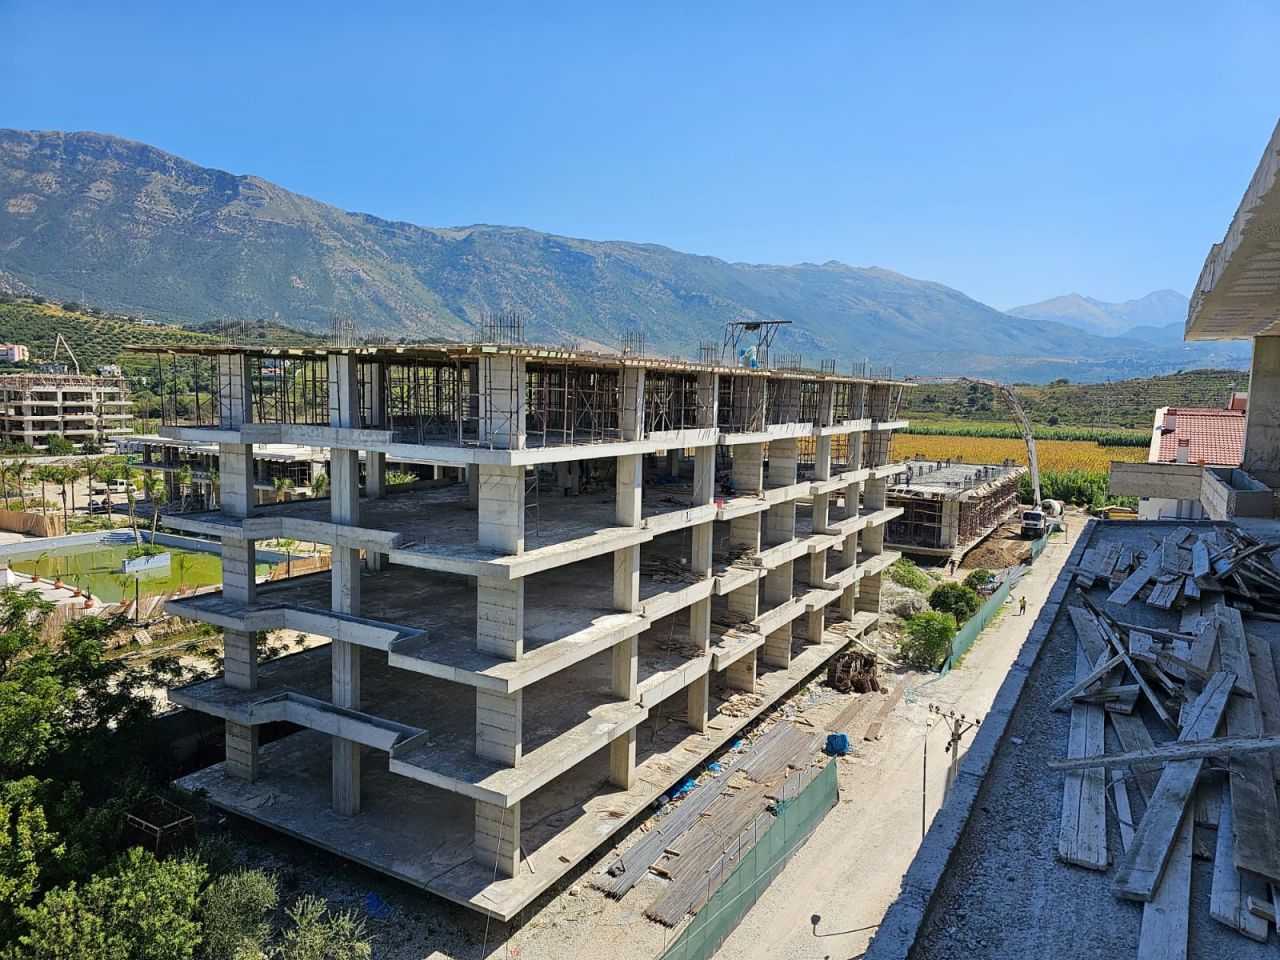 Apartments For Sale In Radhime, Albania